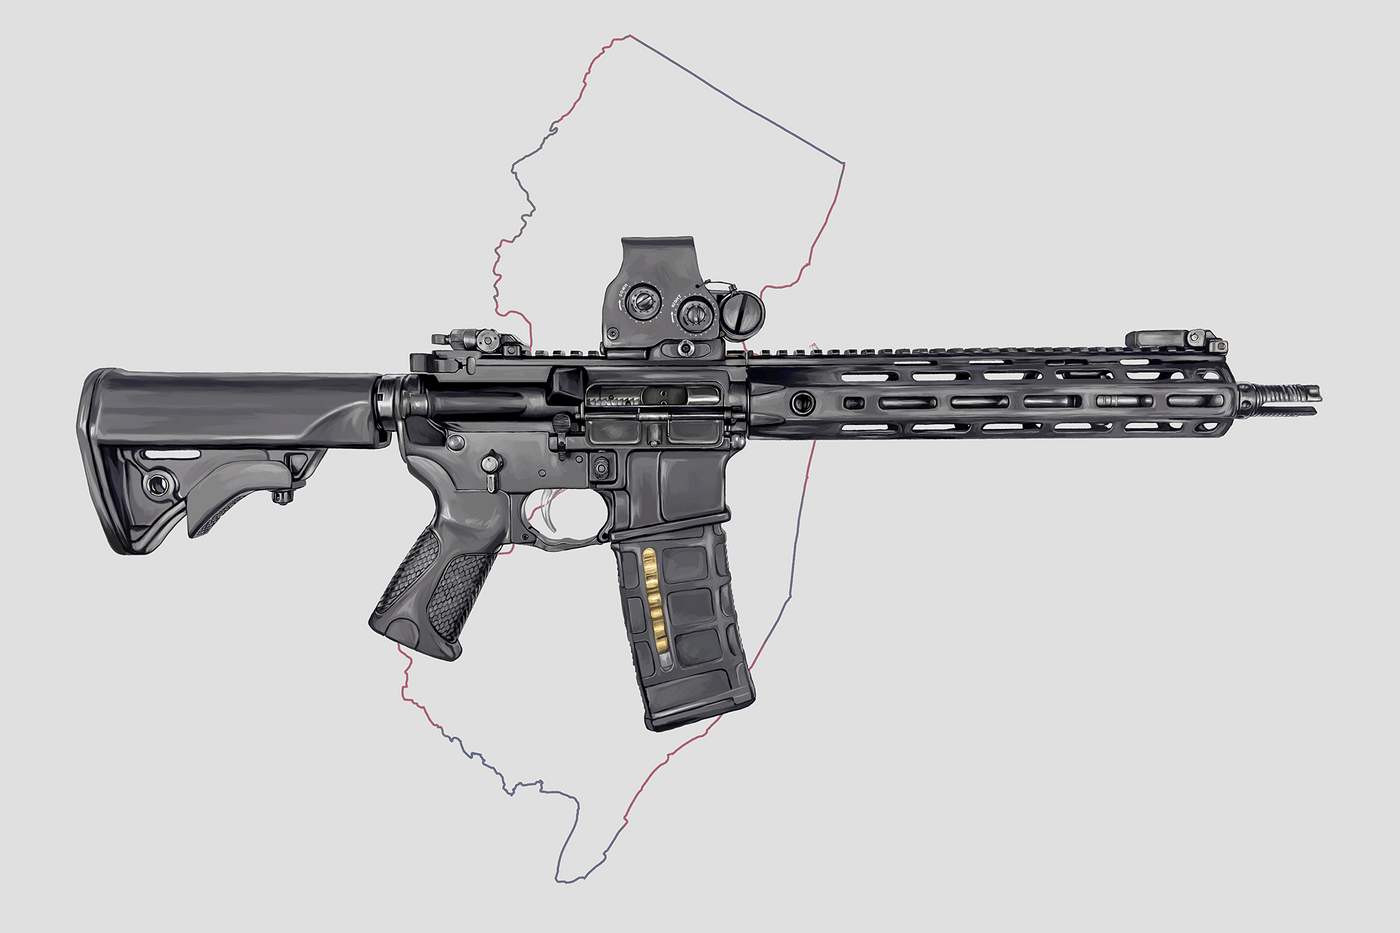 Defending Freedom - New Jersey - AR-15 State Painting (Minimal)